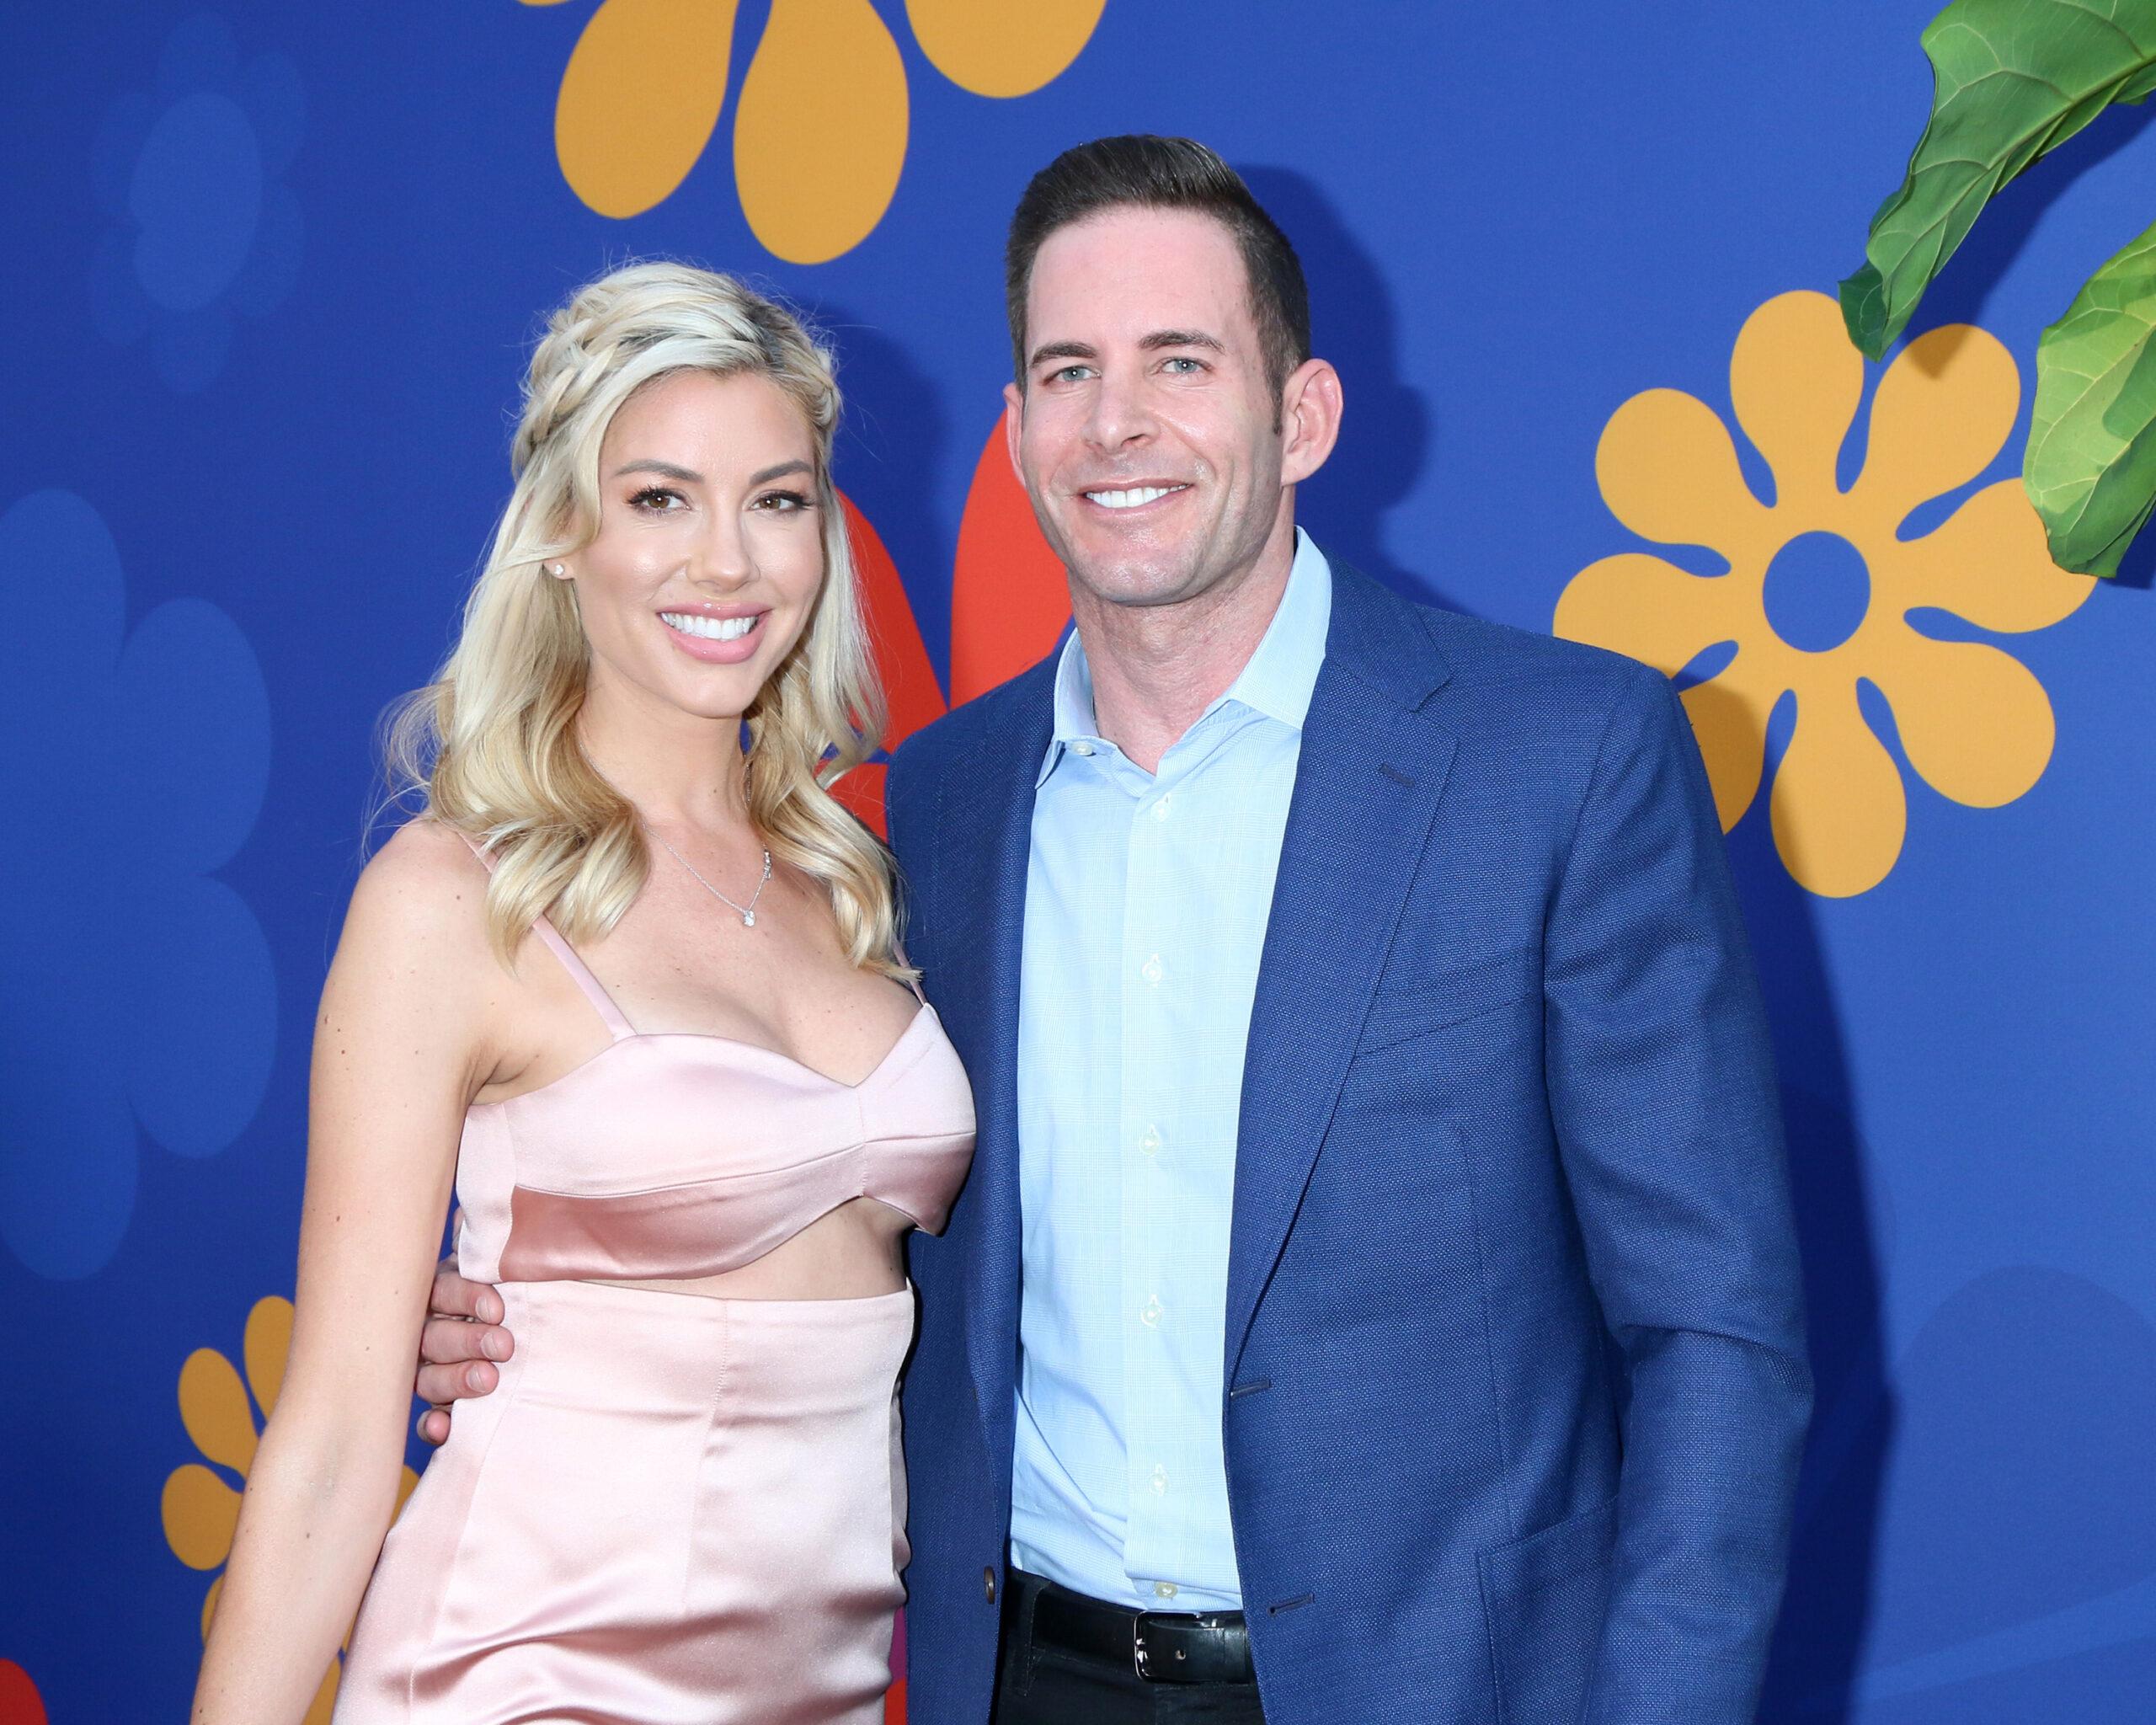 Heather Rae Young and Tarek El Moussa at "A Very Brady Renovation" Premiere Event